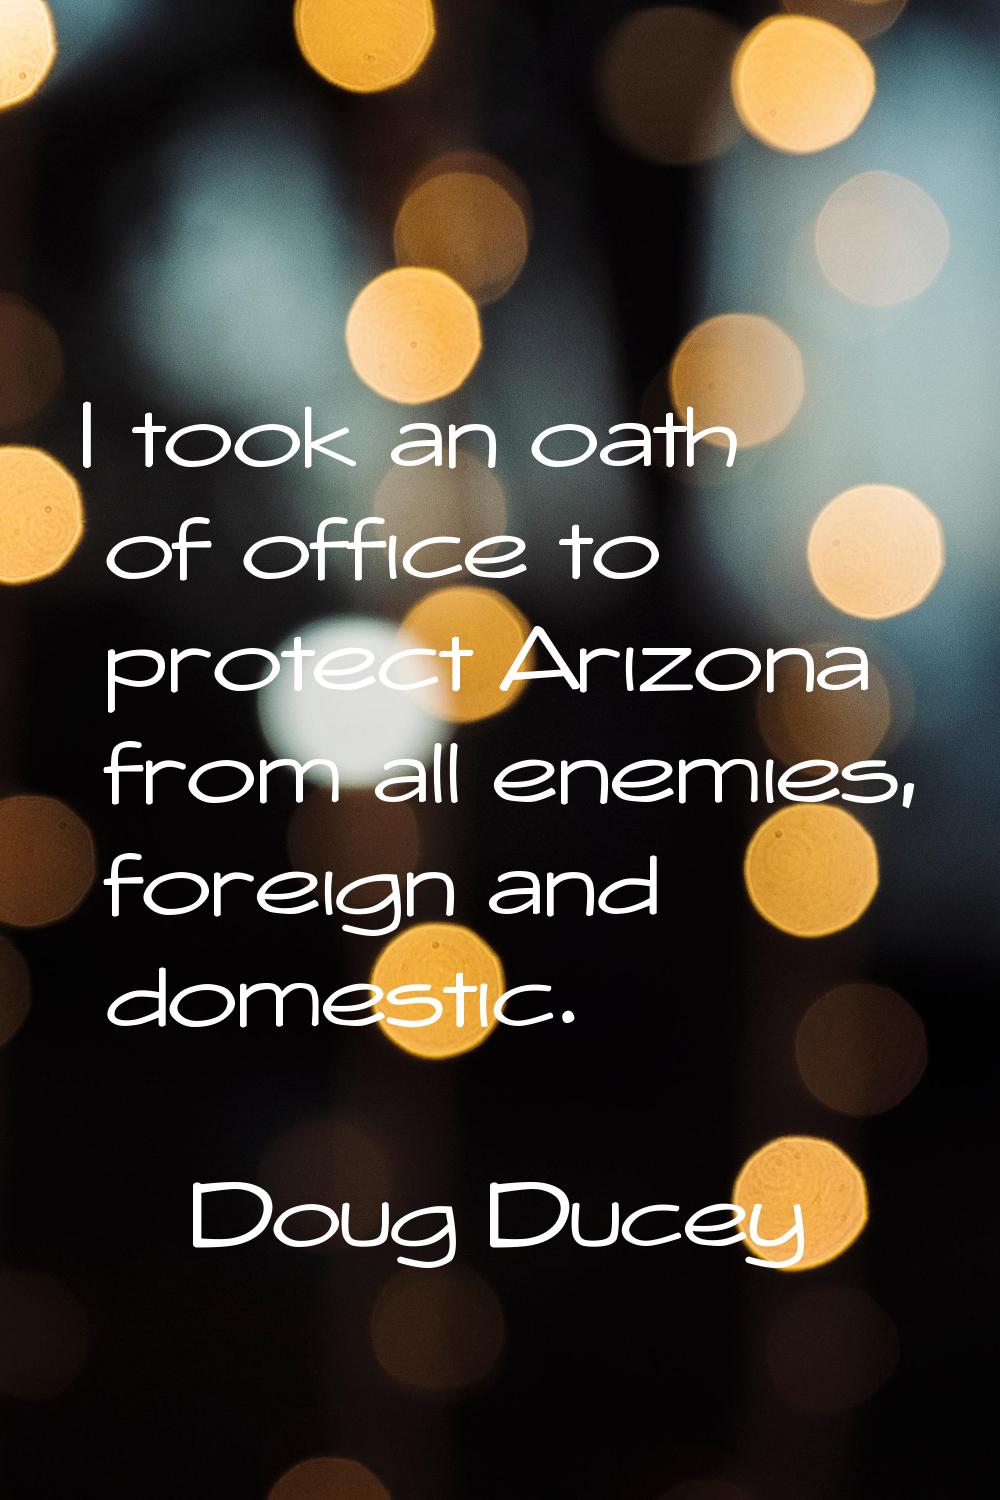 I took an oath of office to protect Arizona from all enemies, foreign and domestic.